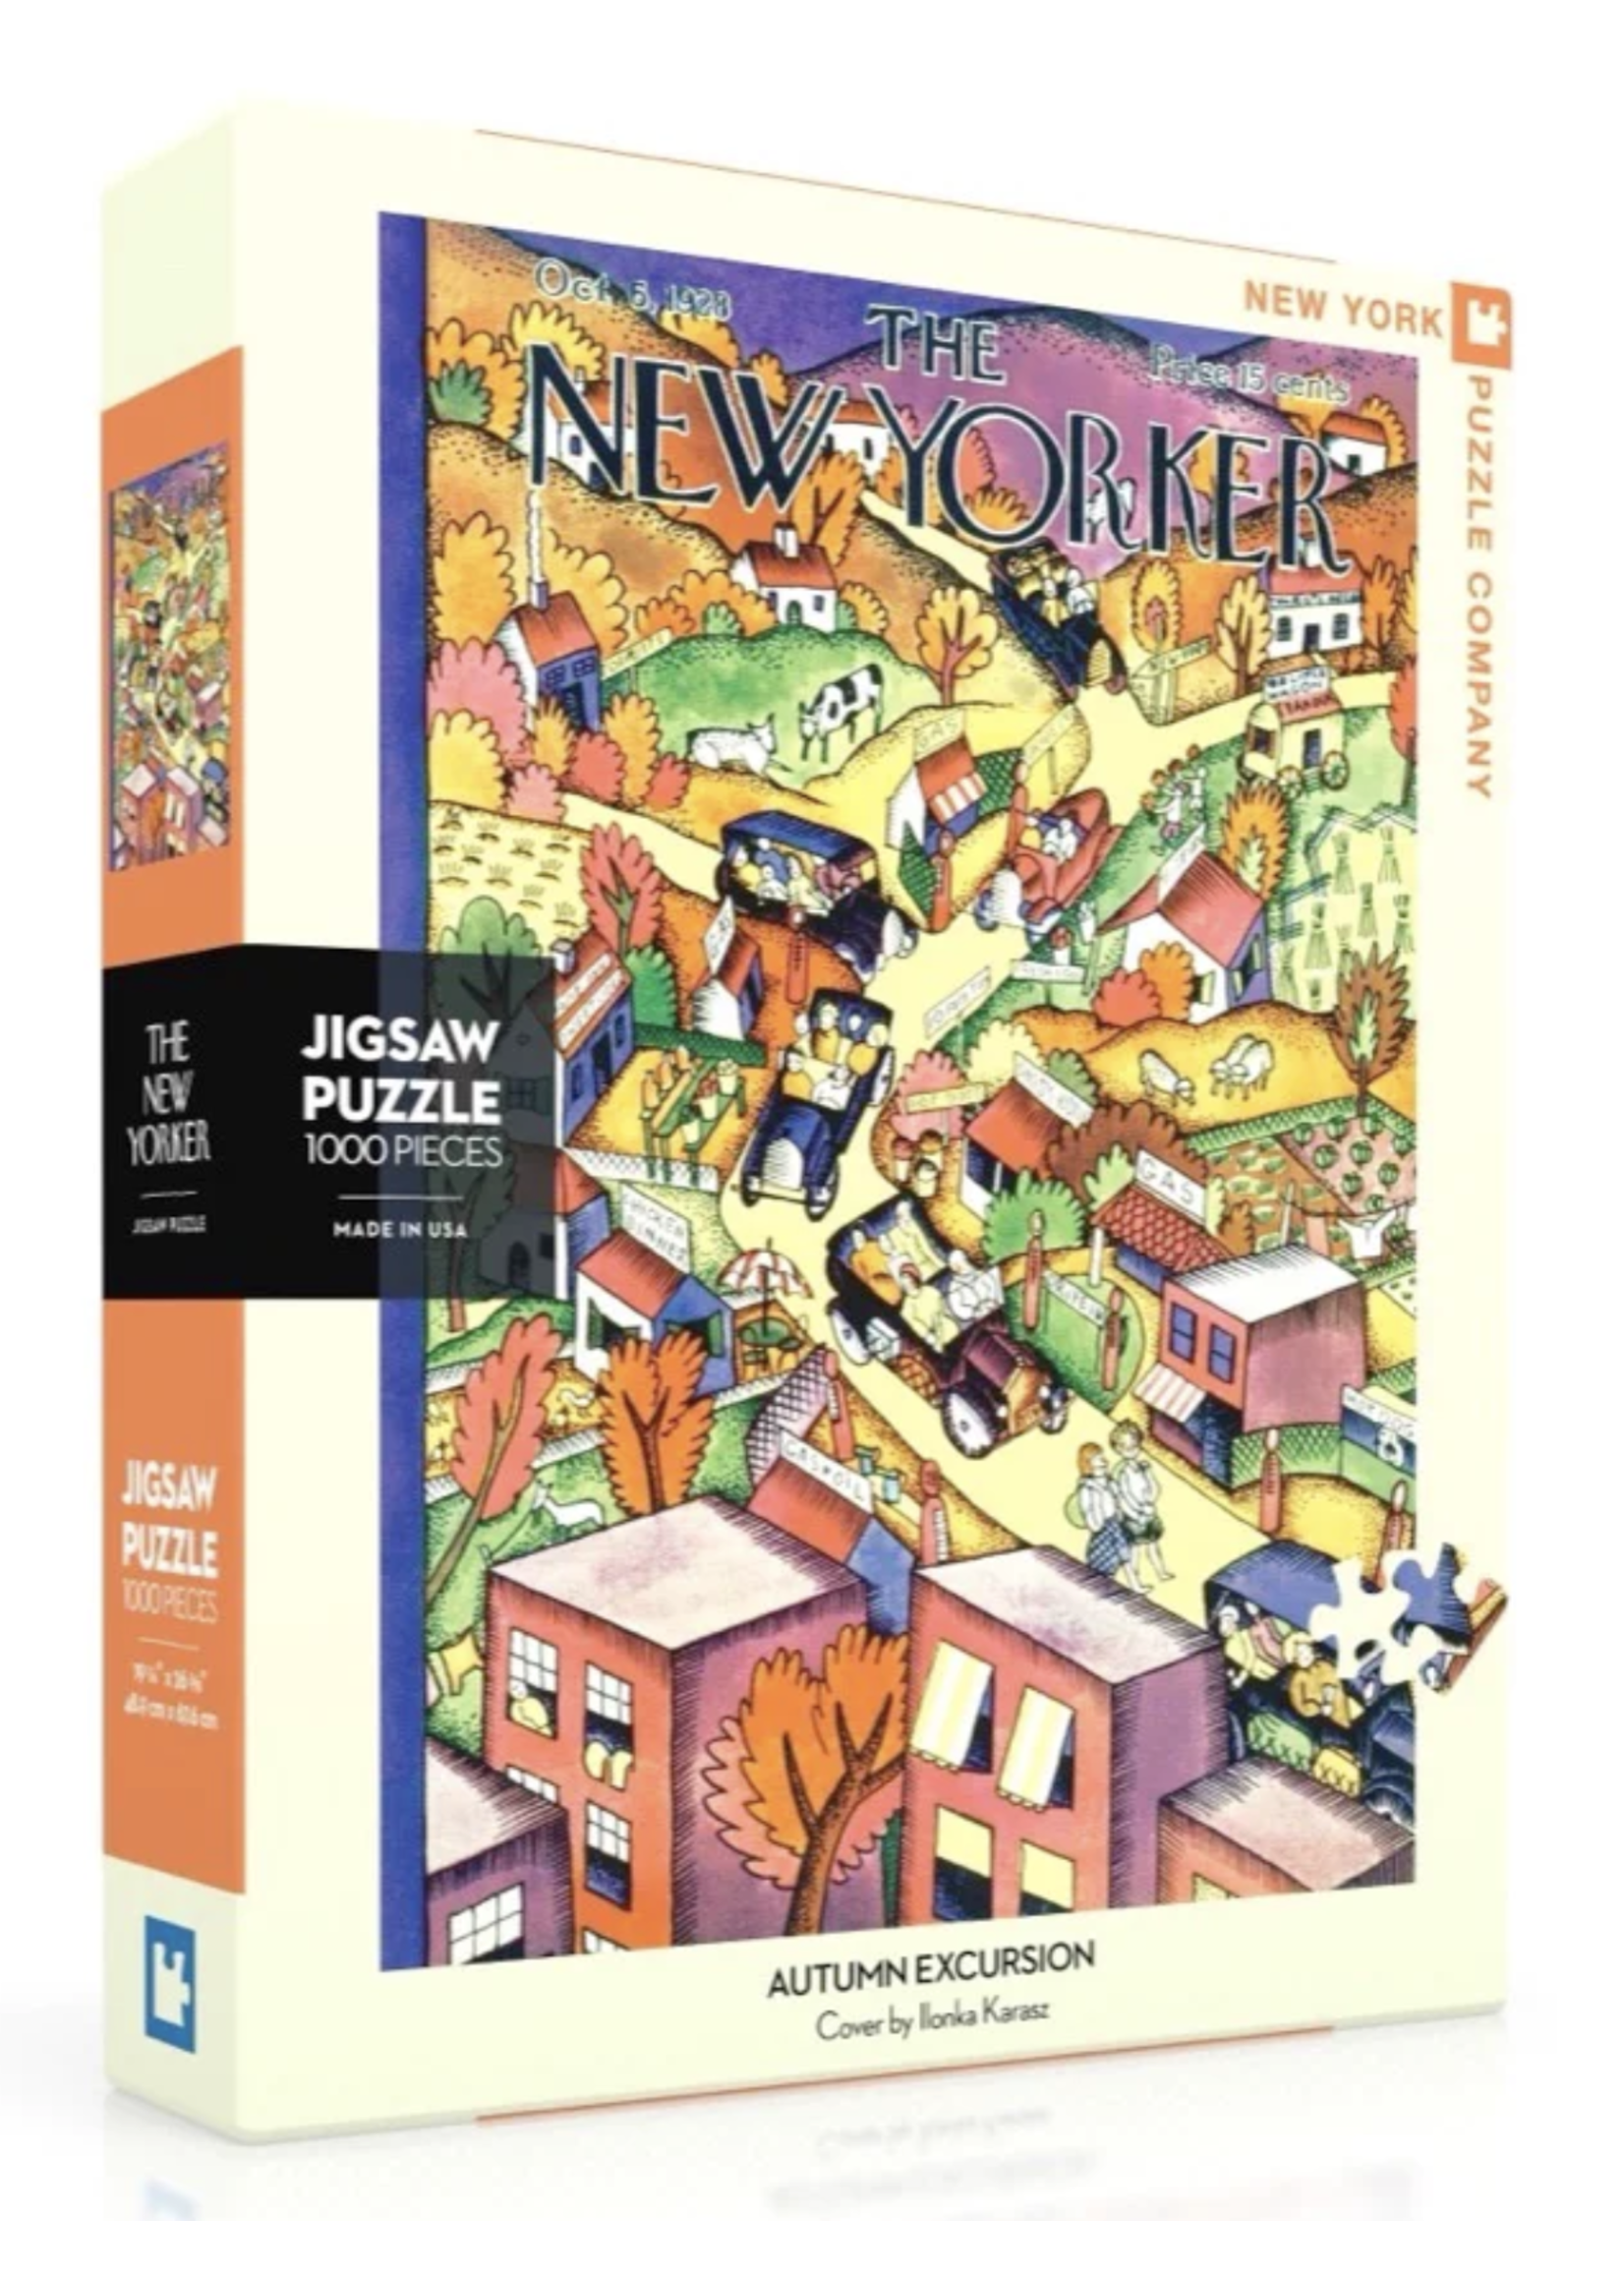 New York Puzzle Co. New Yorker Puzzle - Autumn Excursion